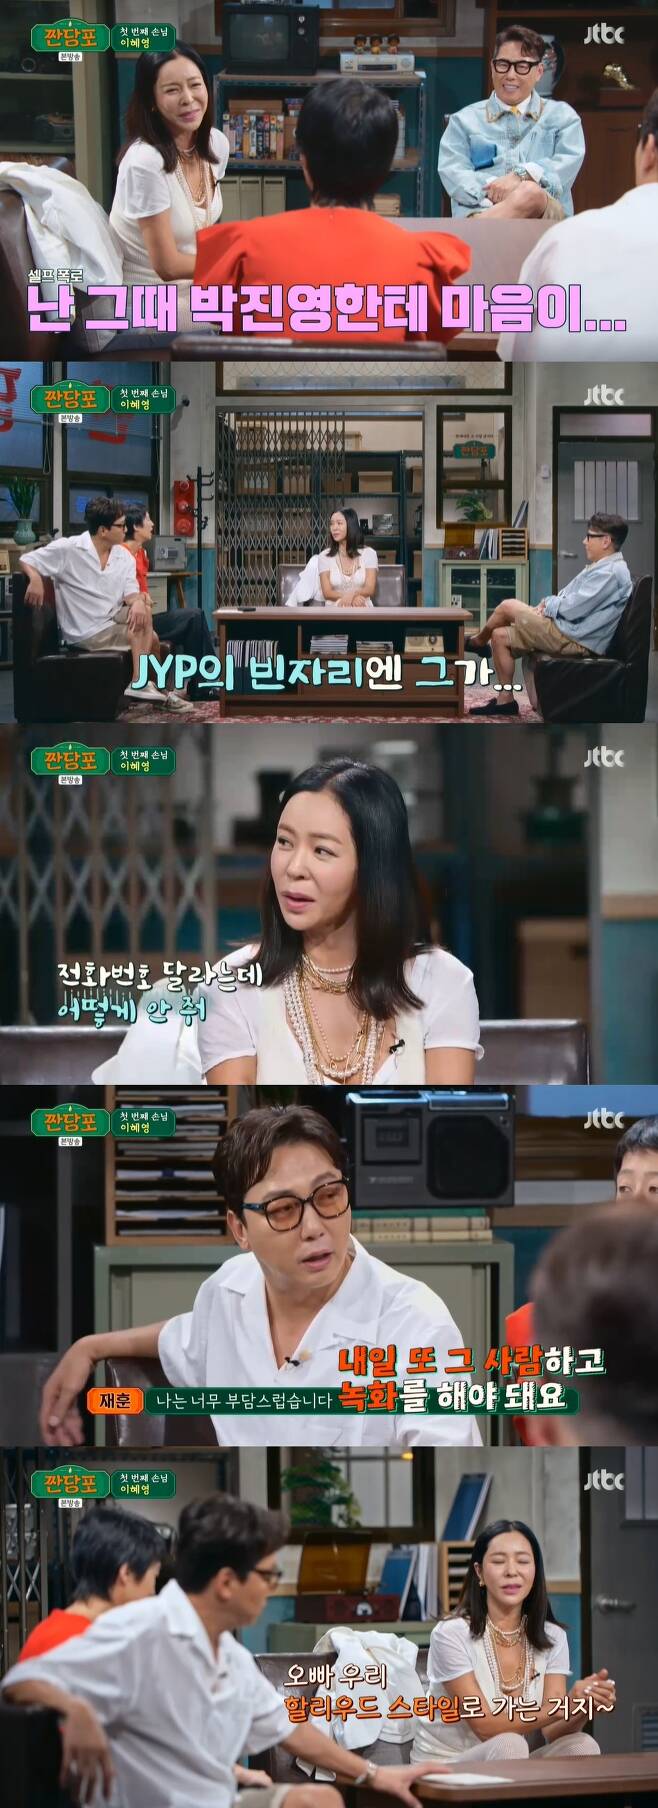 Broadcaster Lee Hye-yeong recalls her first meeting with ex-husband Lee Sang-minJTBC woven sugar cloth, which was first broadcast on June 13, featured 3MC Tak Jae-hun, Yoon Jong Shin, and Lee Hye-yeong, the best friend of Hong Jin Kyung.On this day, Lee Hye-yeong defined 1995, when she met her ex-husband Lee Sang-min, as a terrible year for Savoie.Lee Hye-yeong recalled, I went to a nightclub and my life-long brother, who was watching me, went out and danced. Then I had a heart for J. Y. Park, but J. Y. Park was not interested in me.I was sitting alone and came to the side to ask for a phone number, he recalled his first meeting with Lee Sang-min.In response to Lee Hye-yeongs hot confession, Tak Jae-hun remarked, Im so burdened, I have to do a recording with him tomorrow.Lee Hye-yeong said, We go to Hollywood style. We have to open such a way so that other kids can comfortably divorce and meet X on the air.